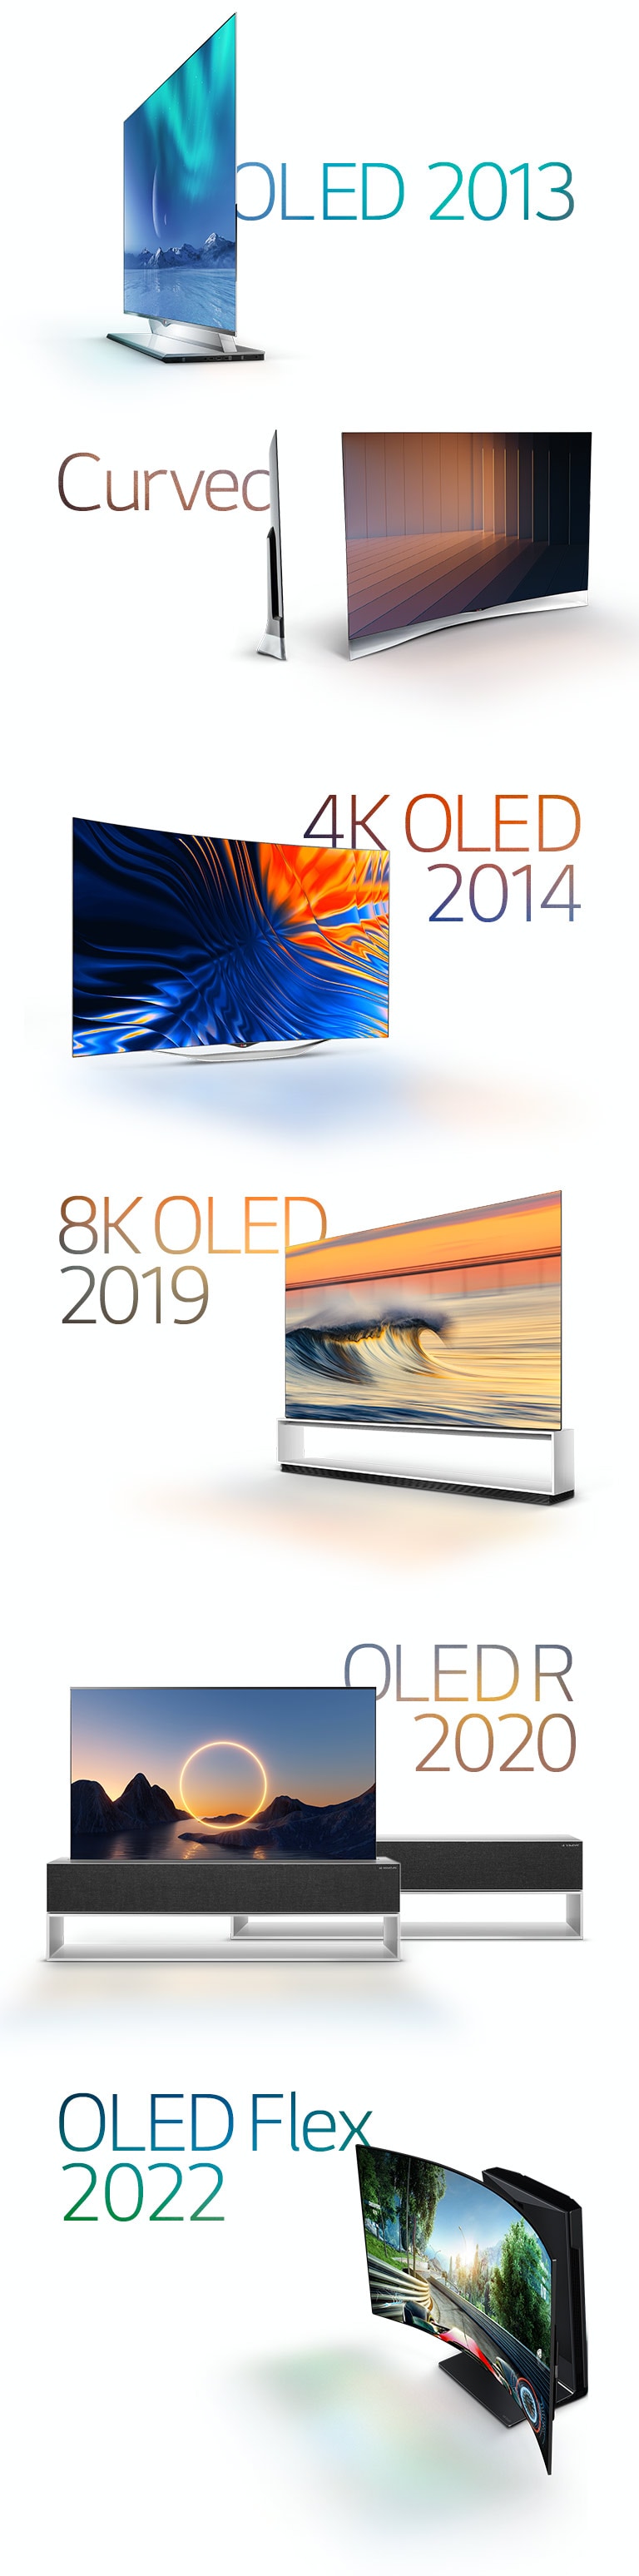 Shopping for an OLED TV? 3 to buy and 1 to skip